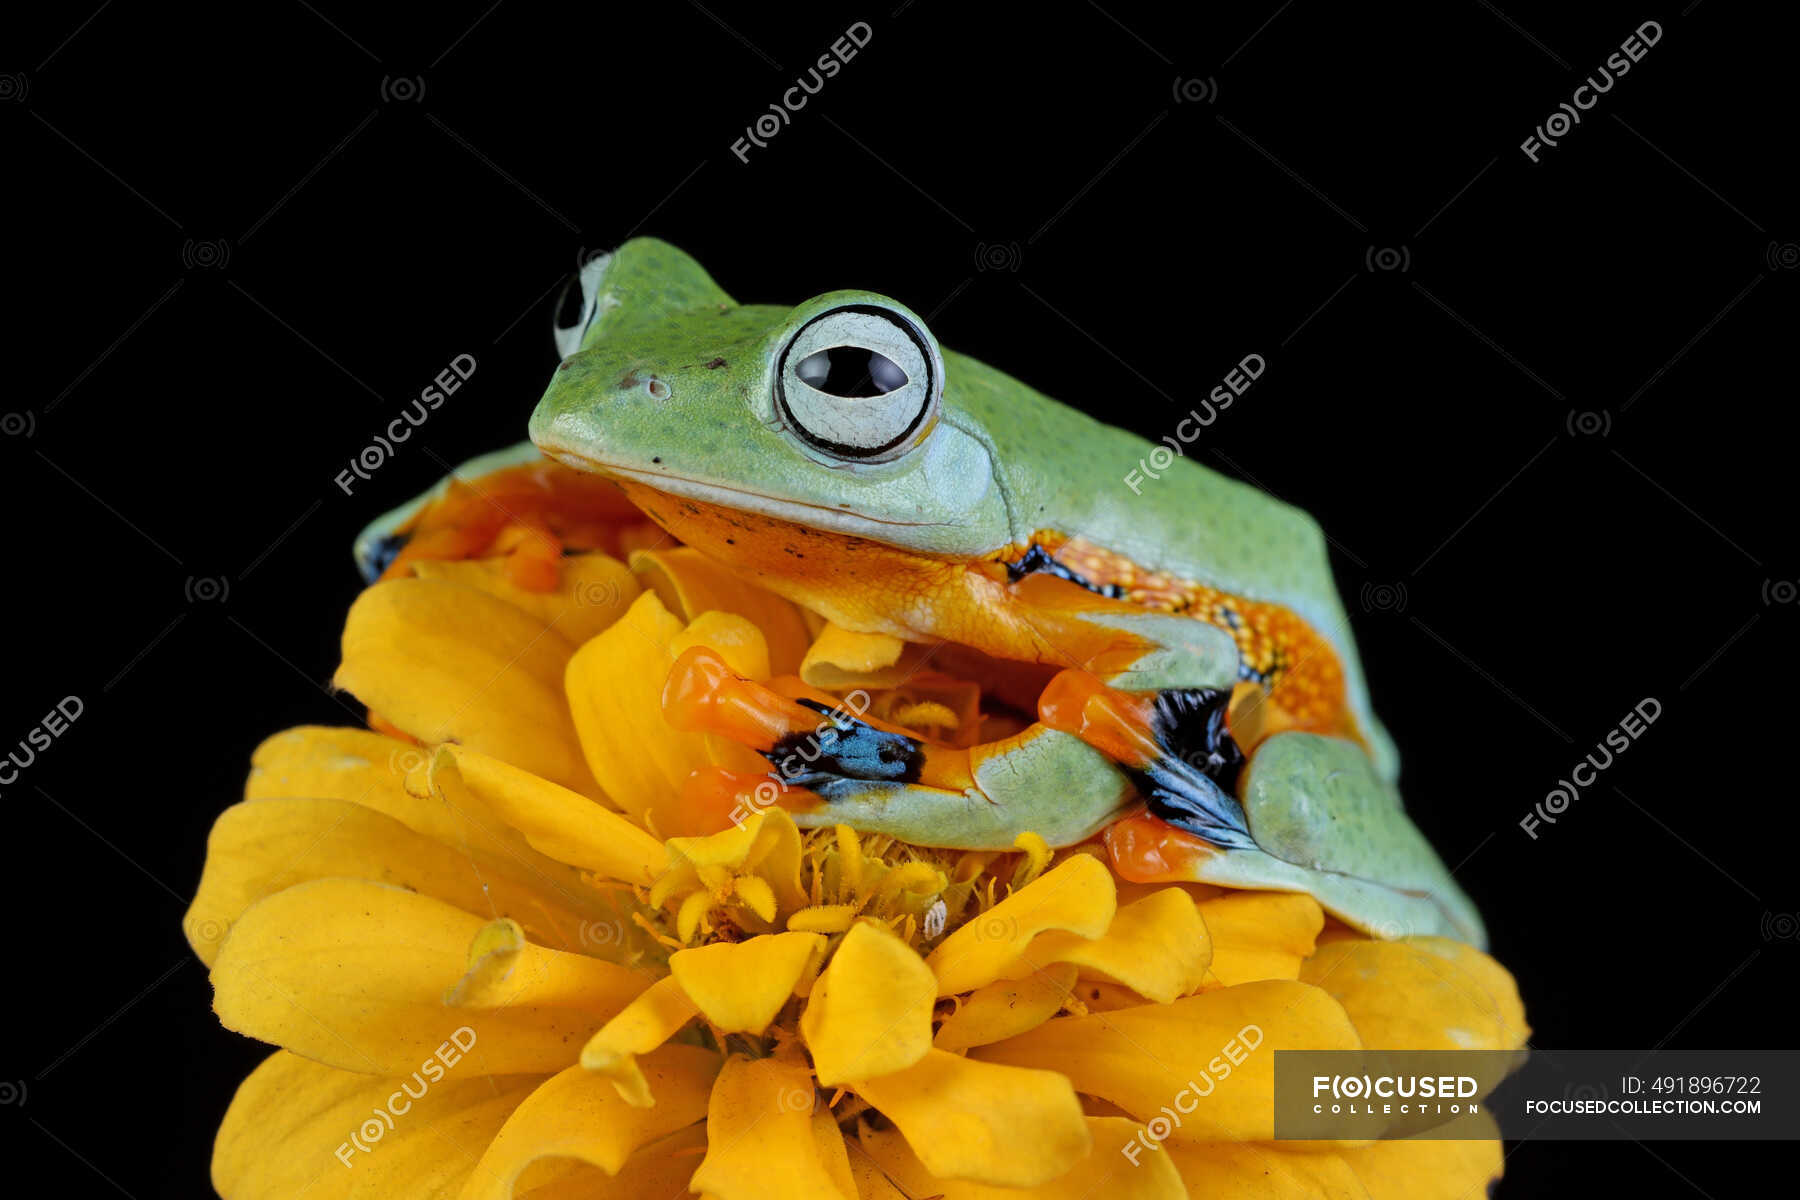 Close-up of an Australian tree frog on a Indonesia — no people, black background - Stock Photo | #491896722